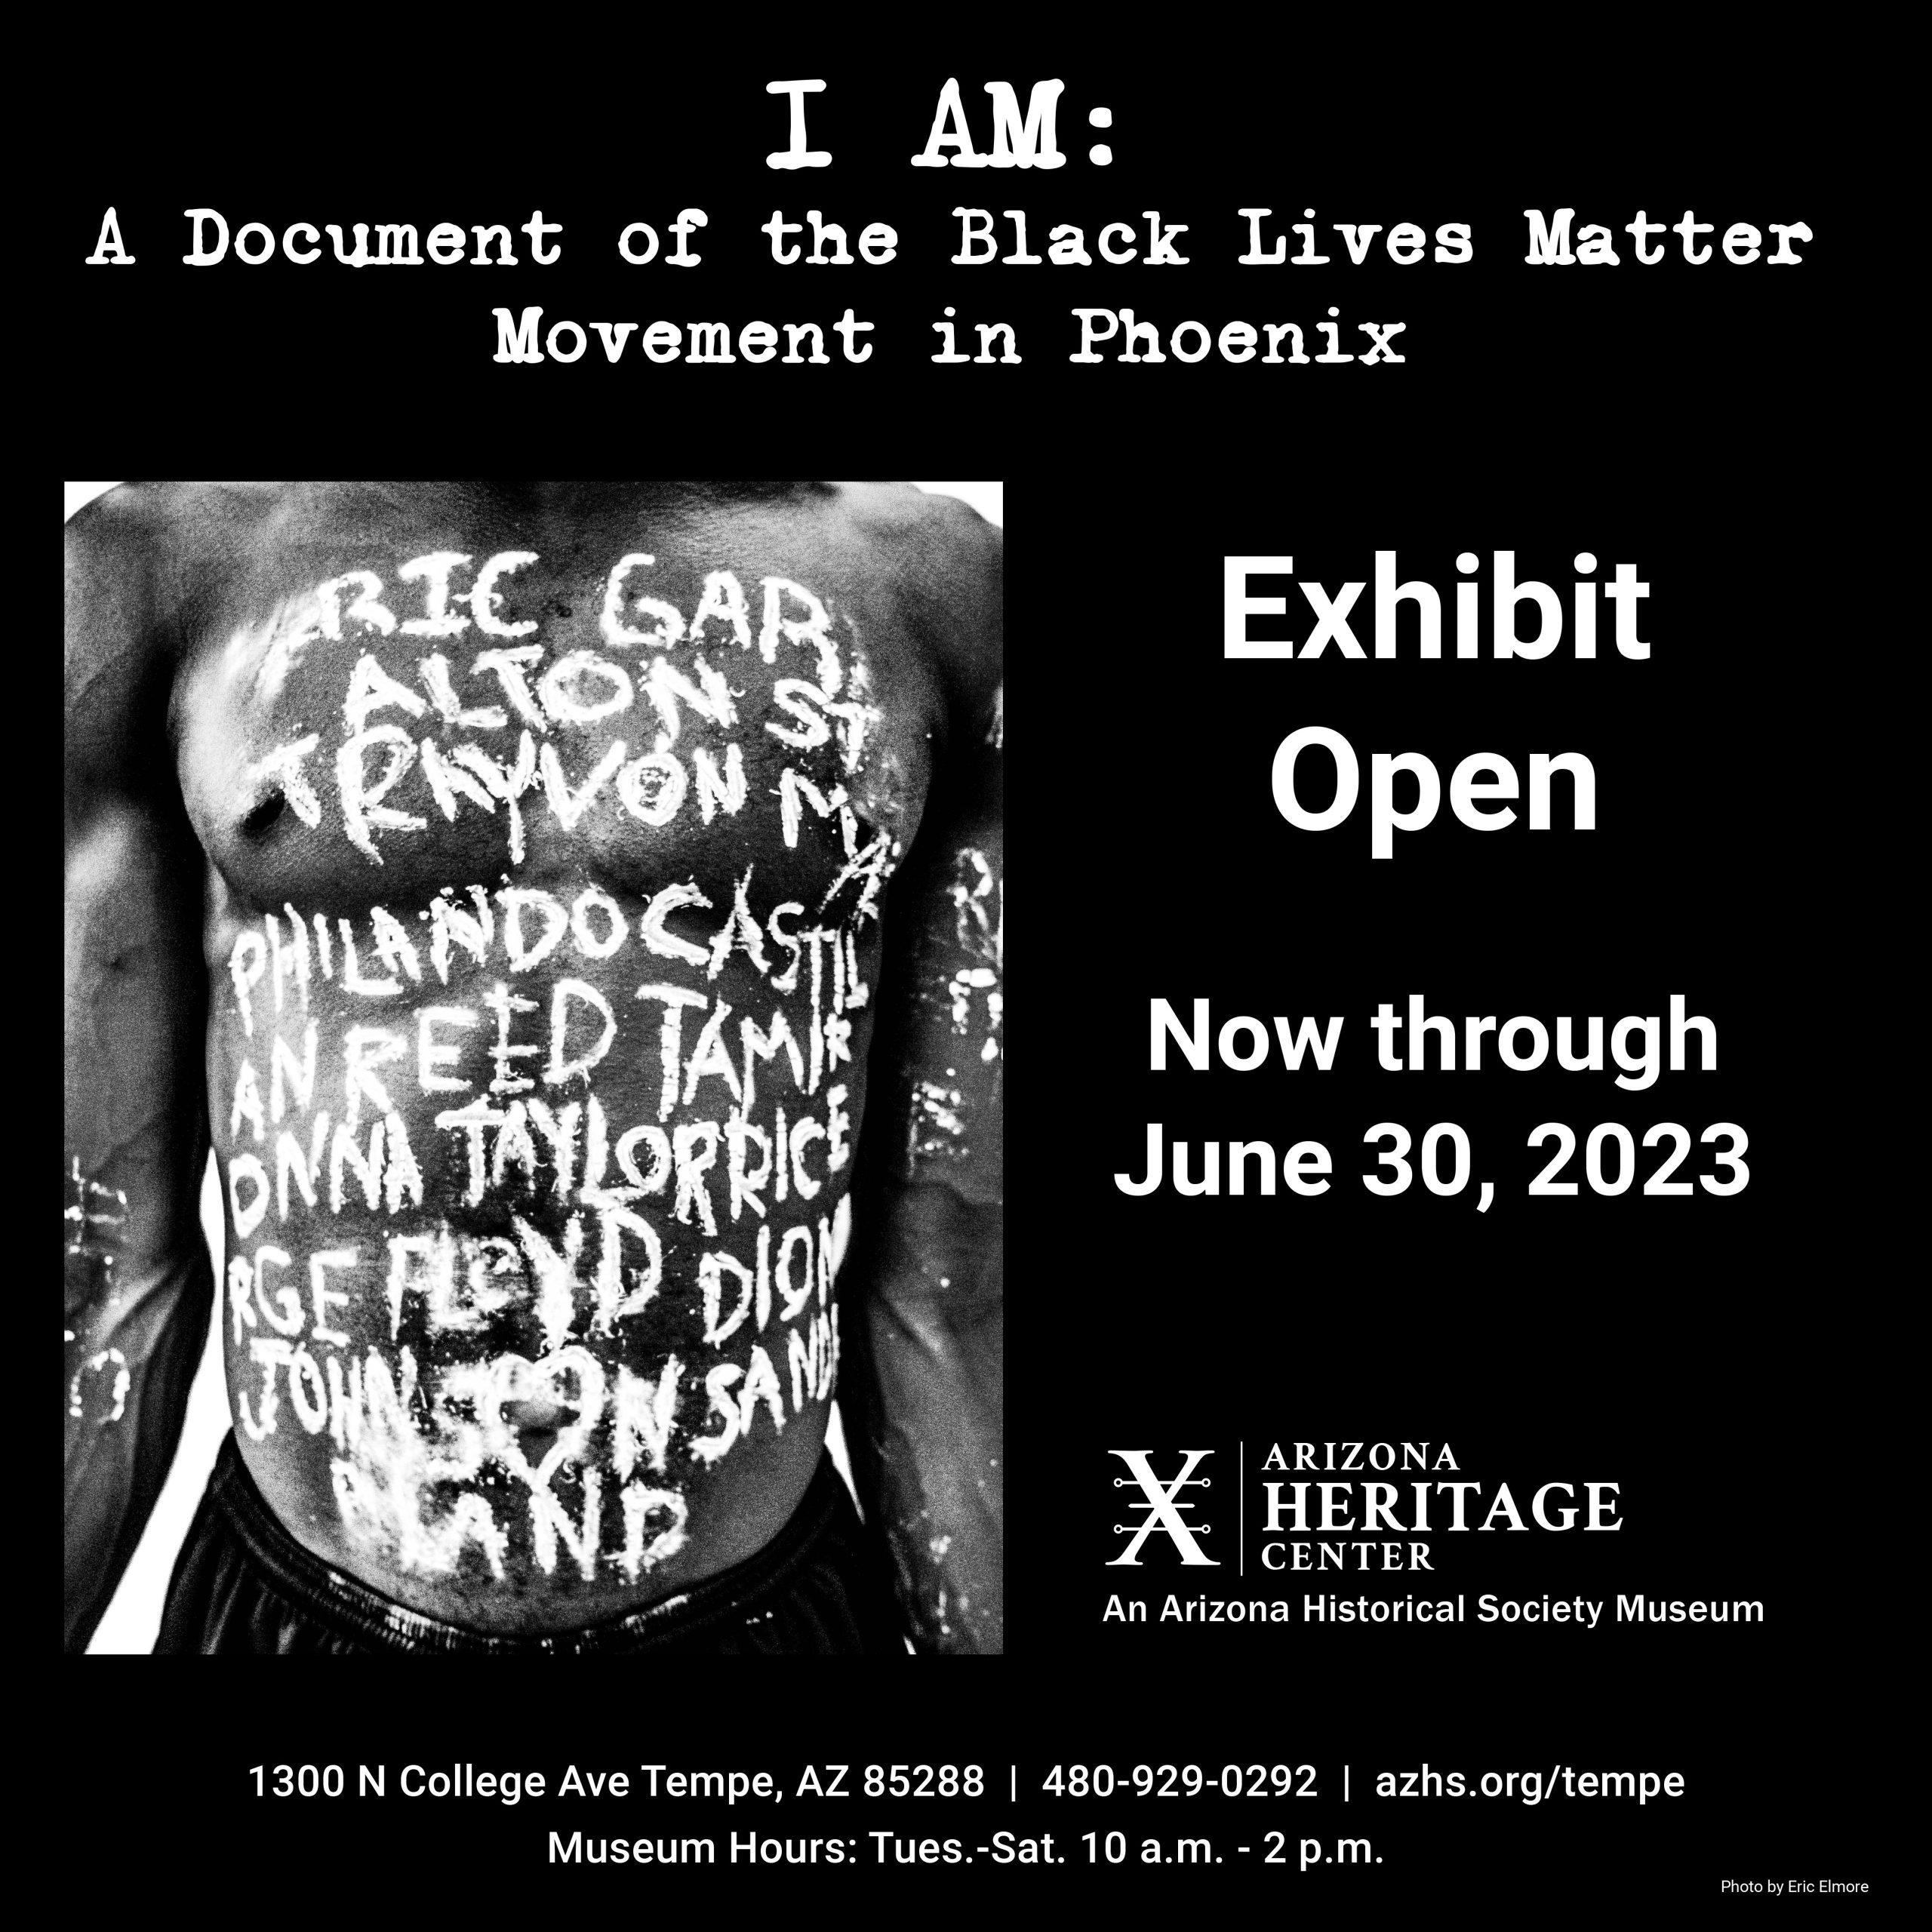 I AM: A Document of the Black Lives Matter Movement in Phoenix